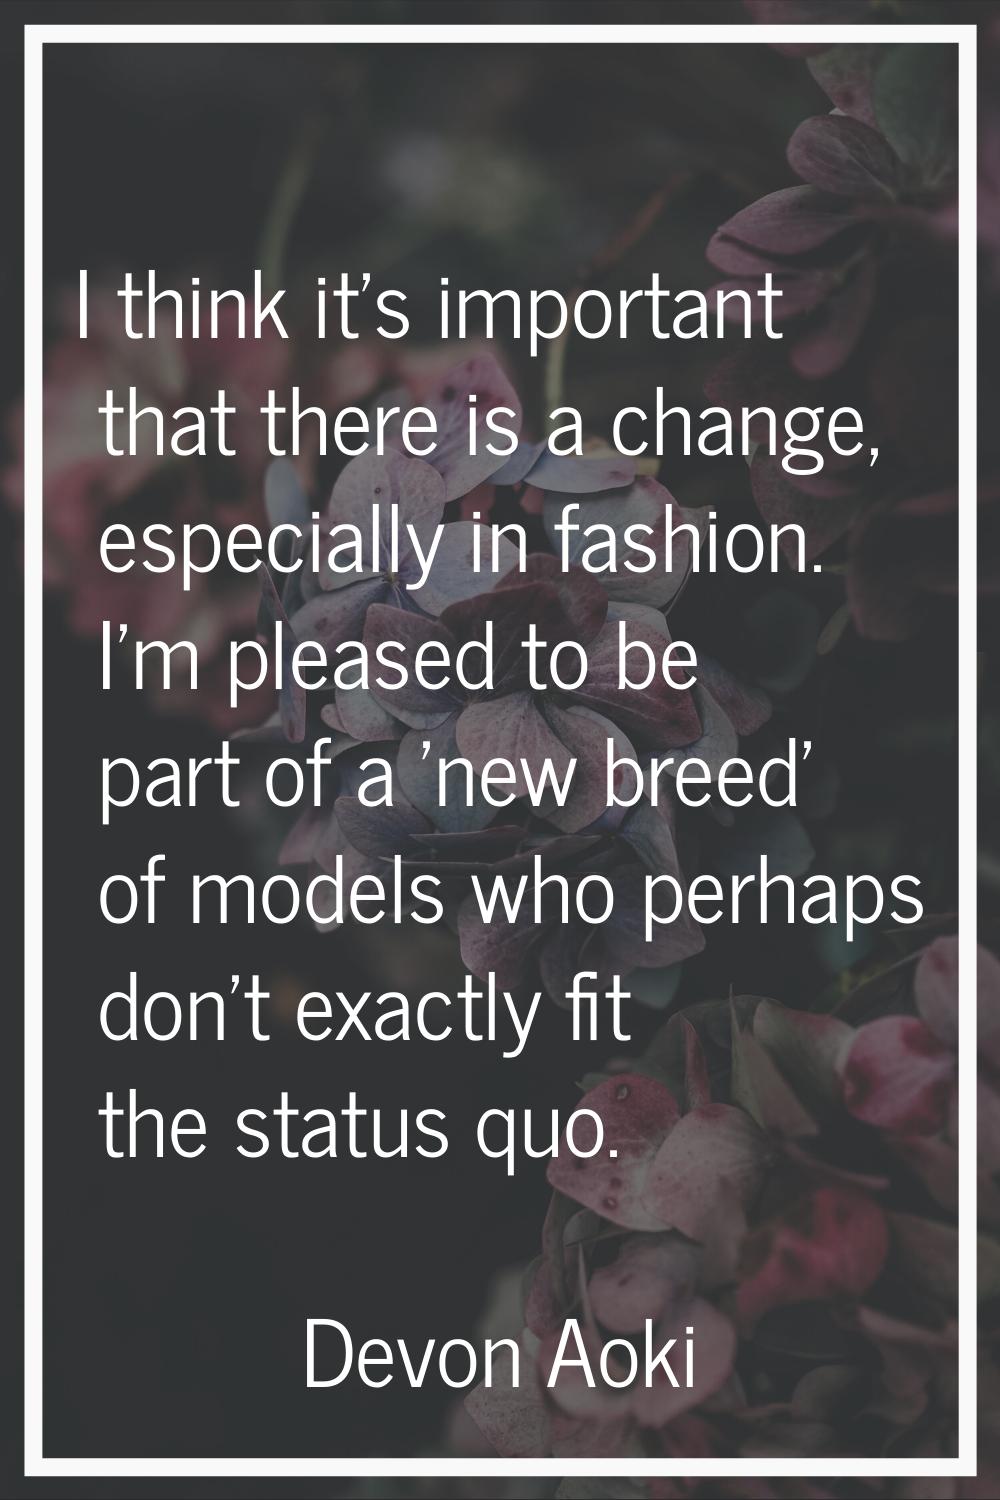 I think it's important that there is a change, especially in fashion. I'm pleased to be part of a '